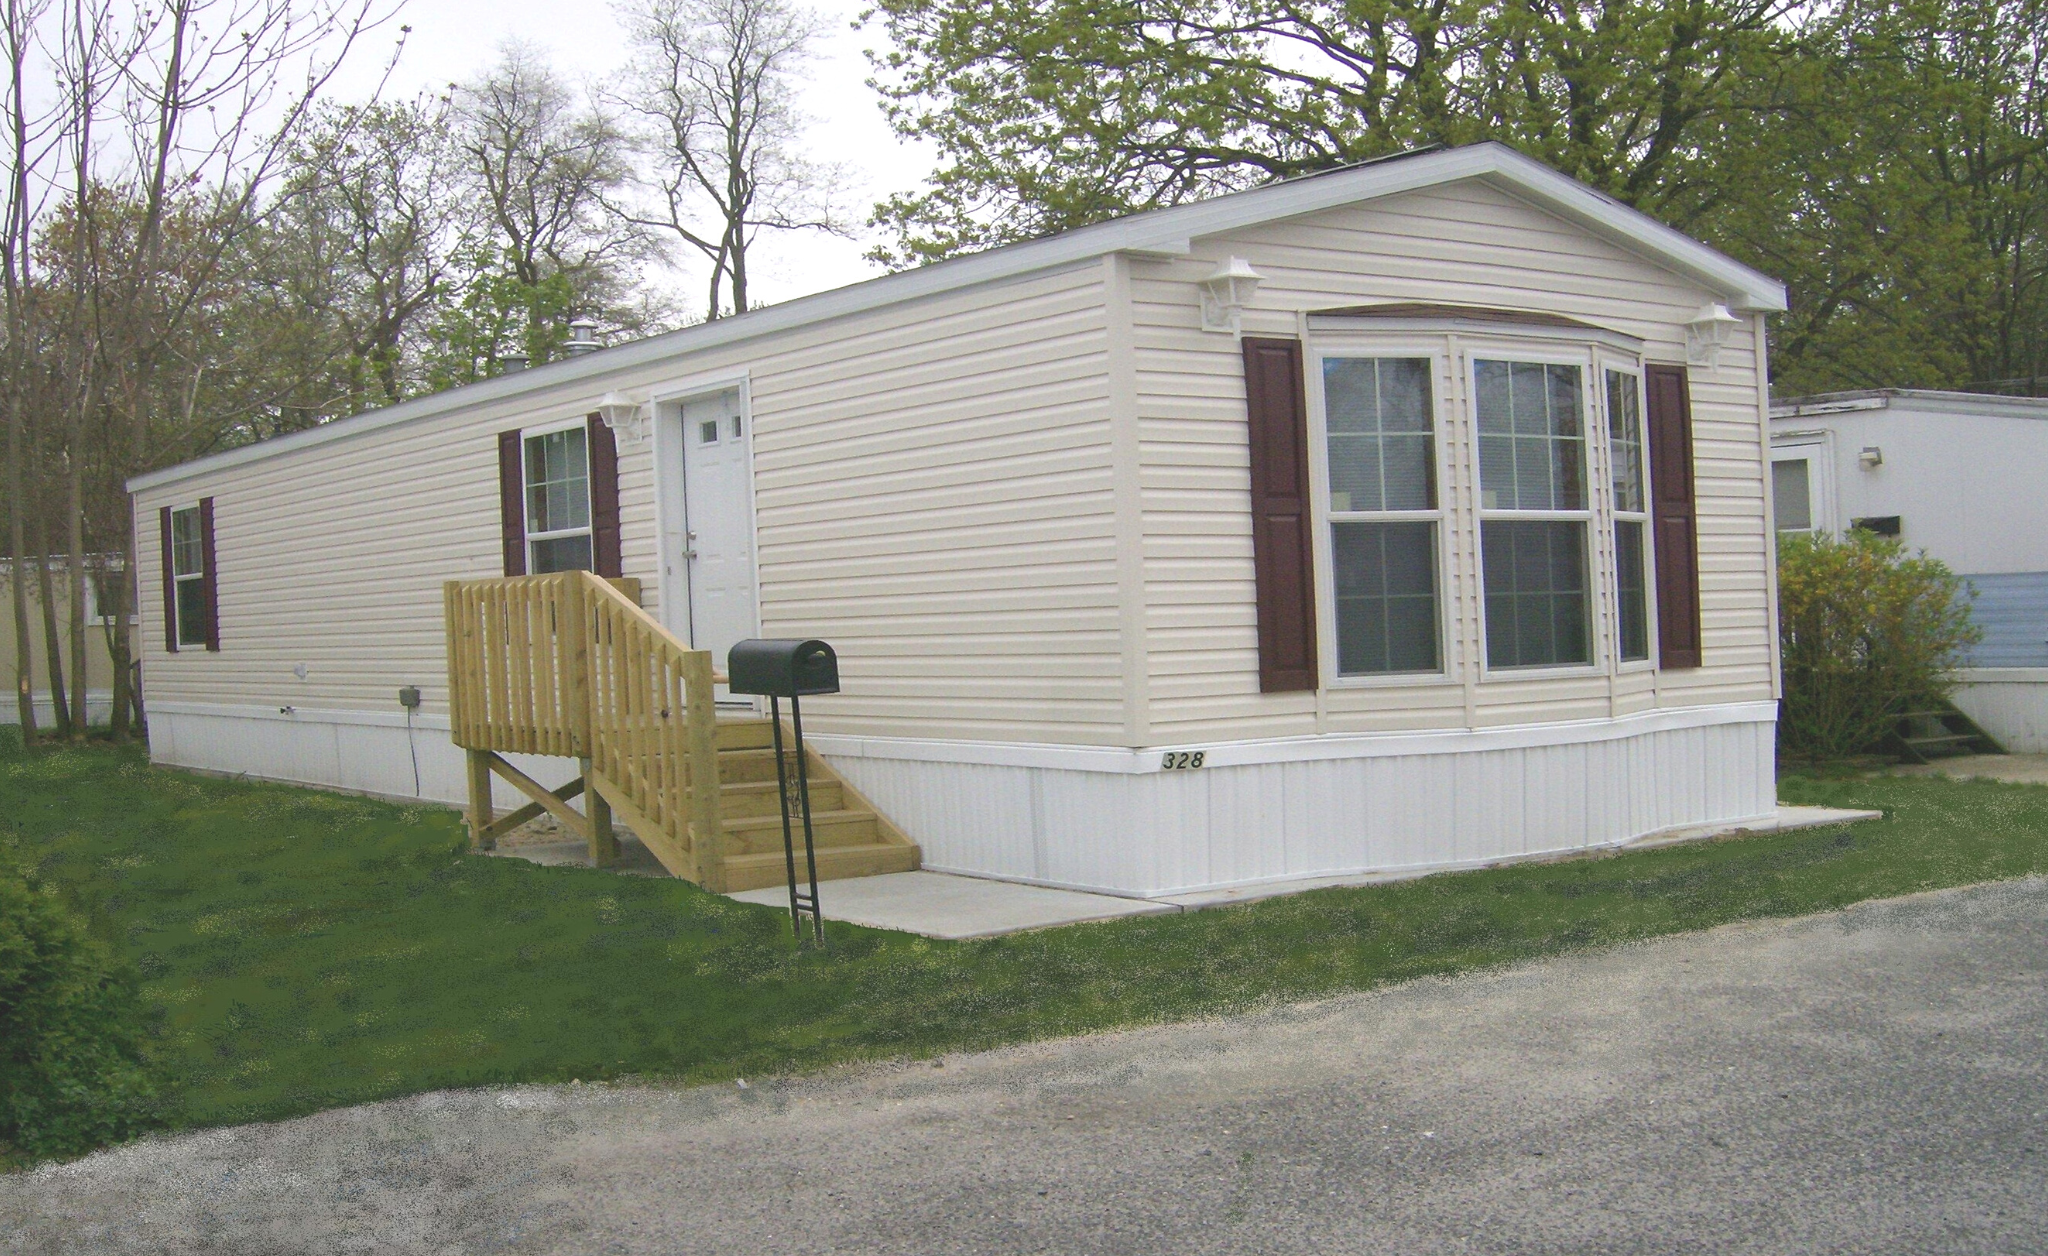 A manufactured home from the Affordable Housing Alliance's Pine Tree Community in Eatontown, New Jersey.